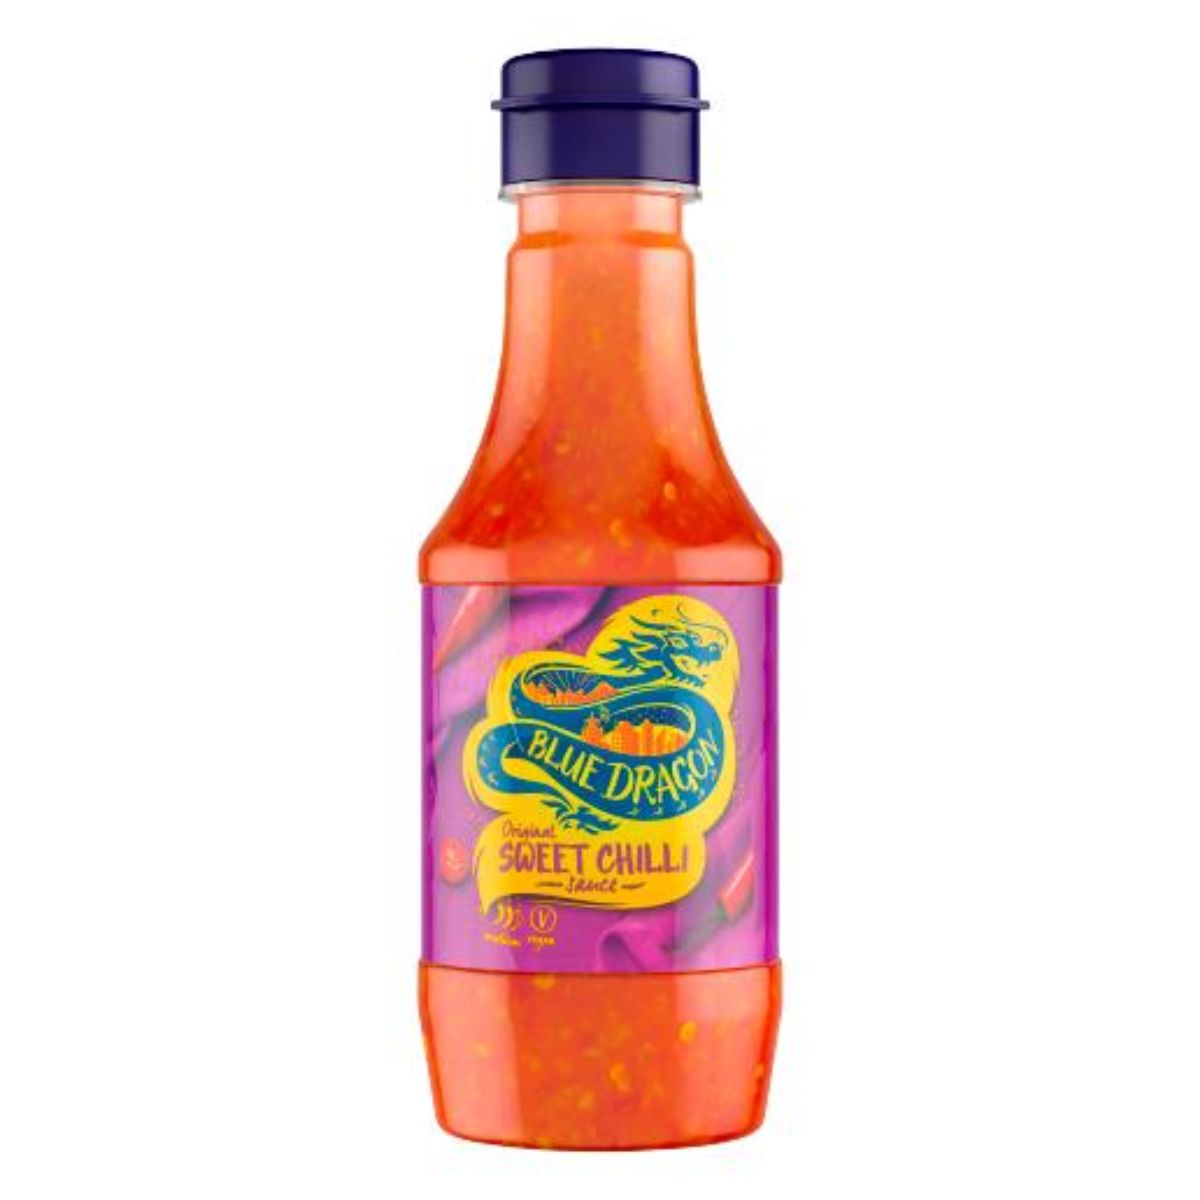 A bottle of Blue Dragon - Original Thai Sweet Chilli Sauce - 190ml on a white background.